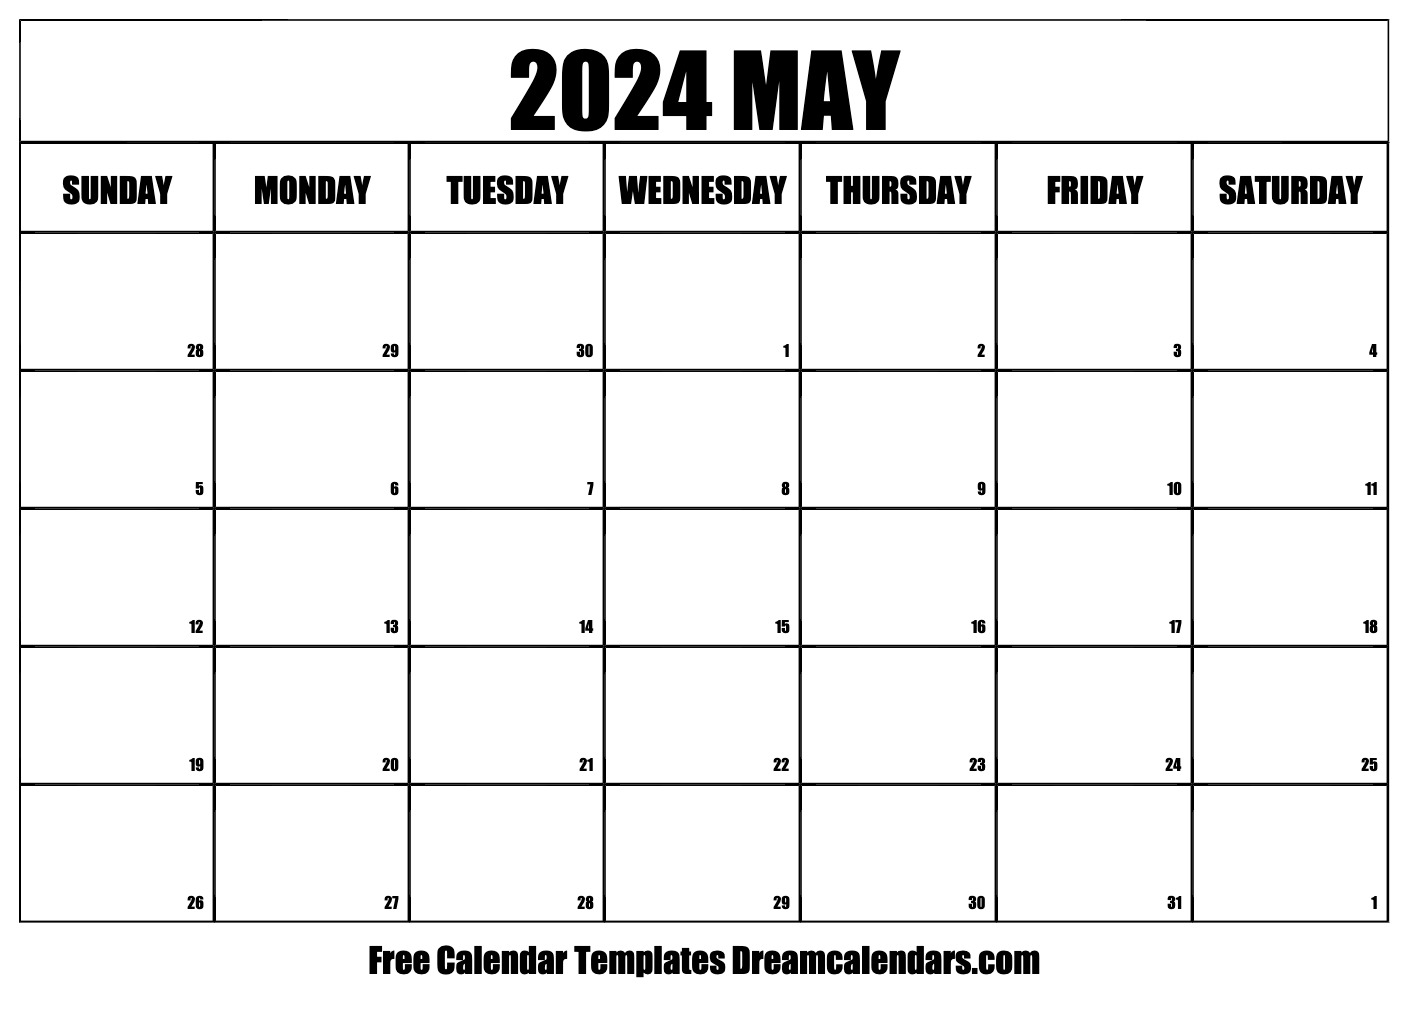 Calendar 2024 March April May Printable Top The Best Review of